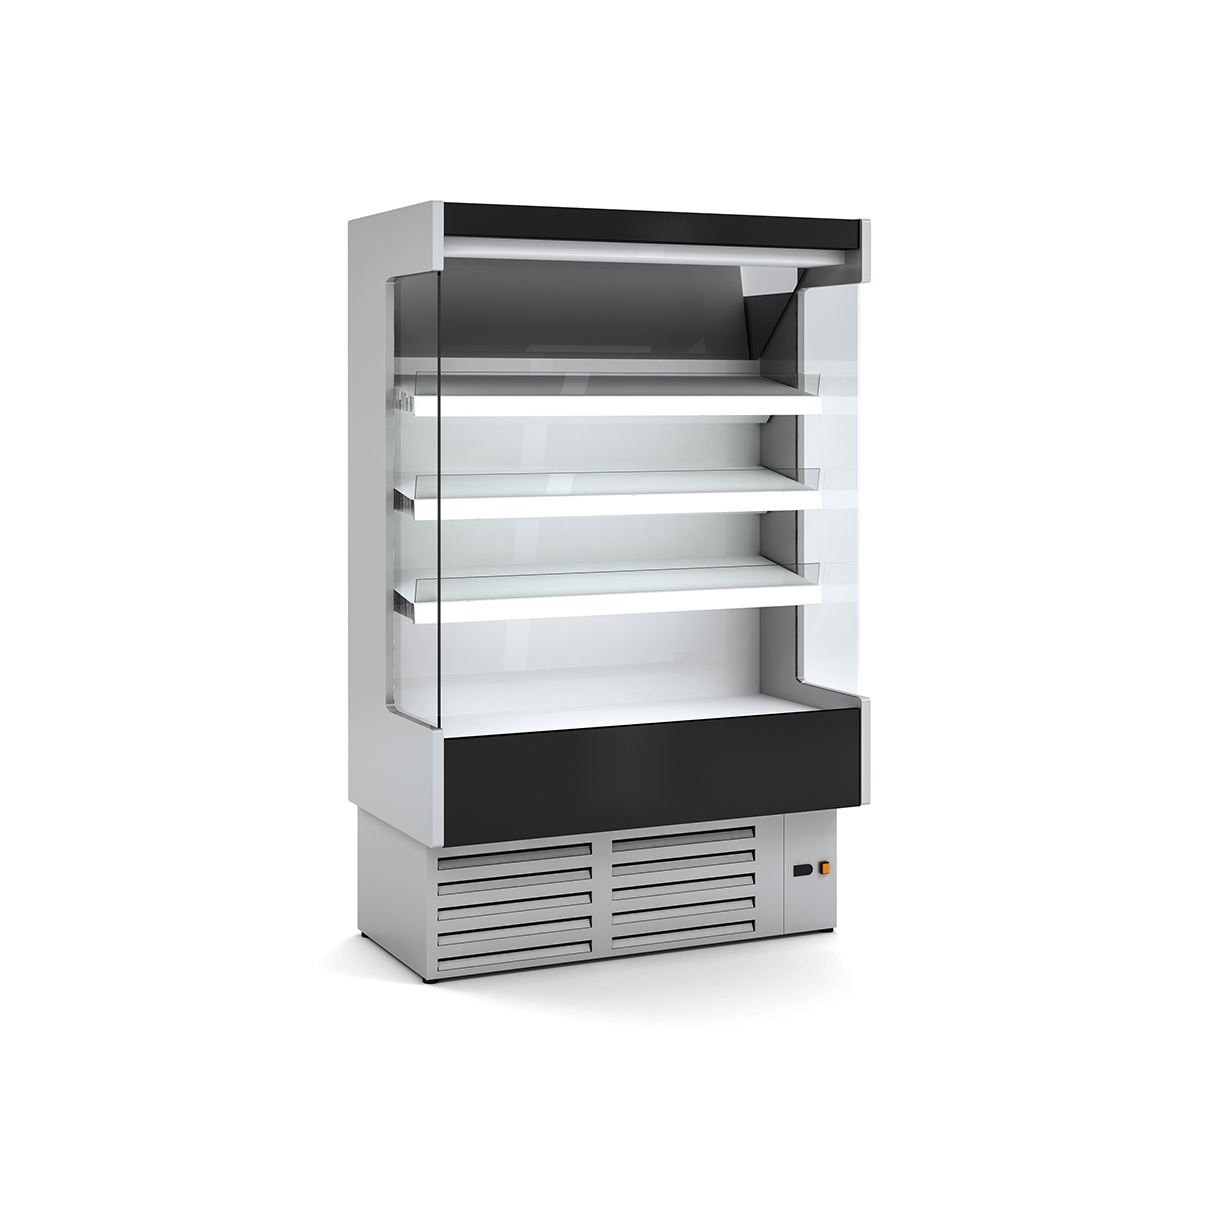 copy of REFRIGERATED WALL CABINET DS1 H1